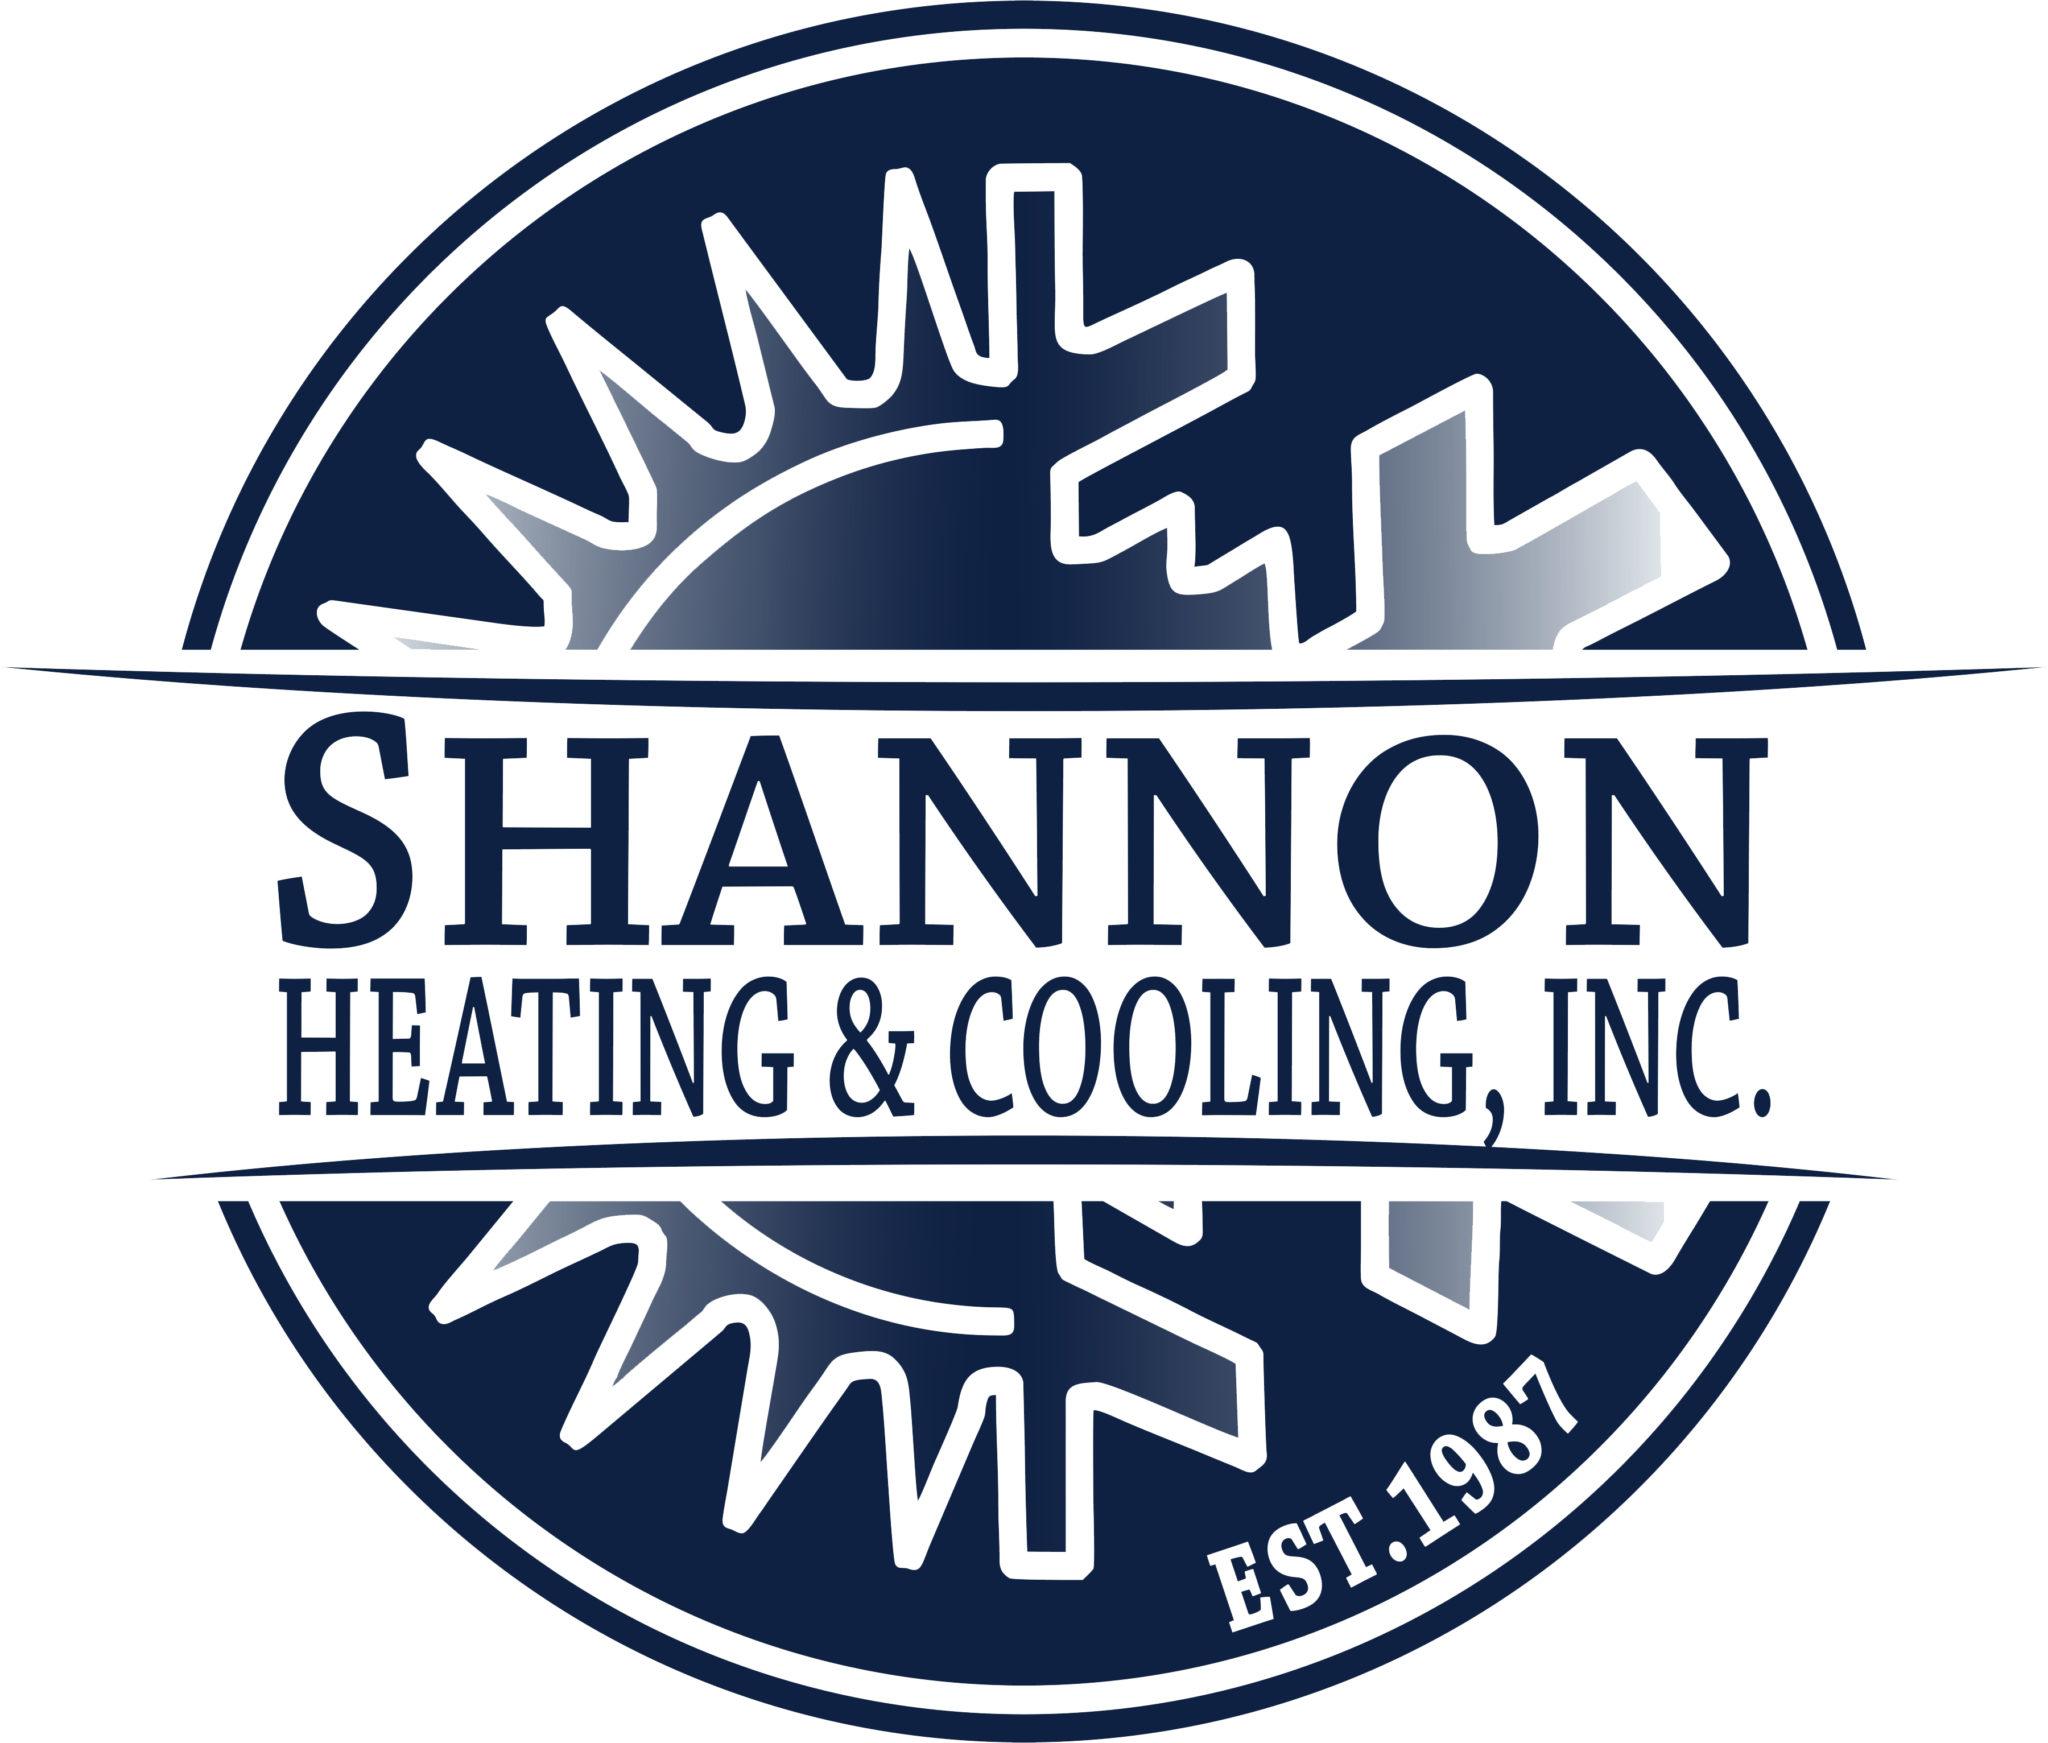 Shannon Logo - Shannon Heating and Cooling Home Heating and Cooling